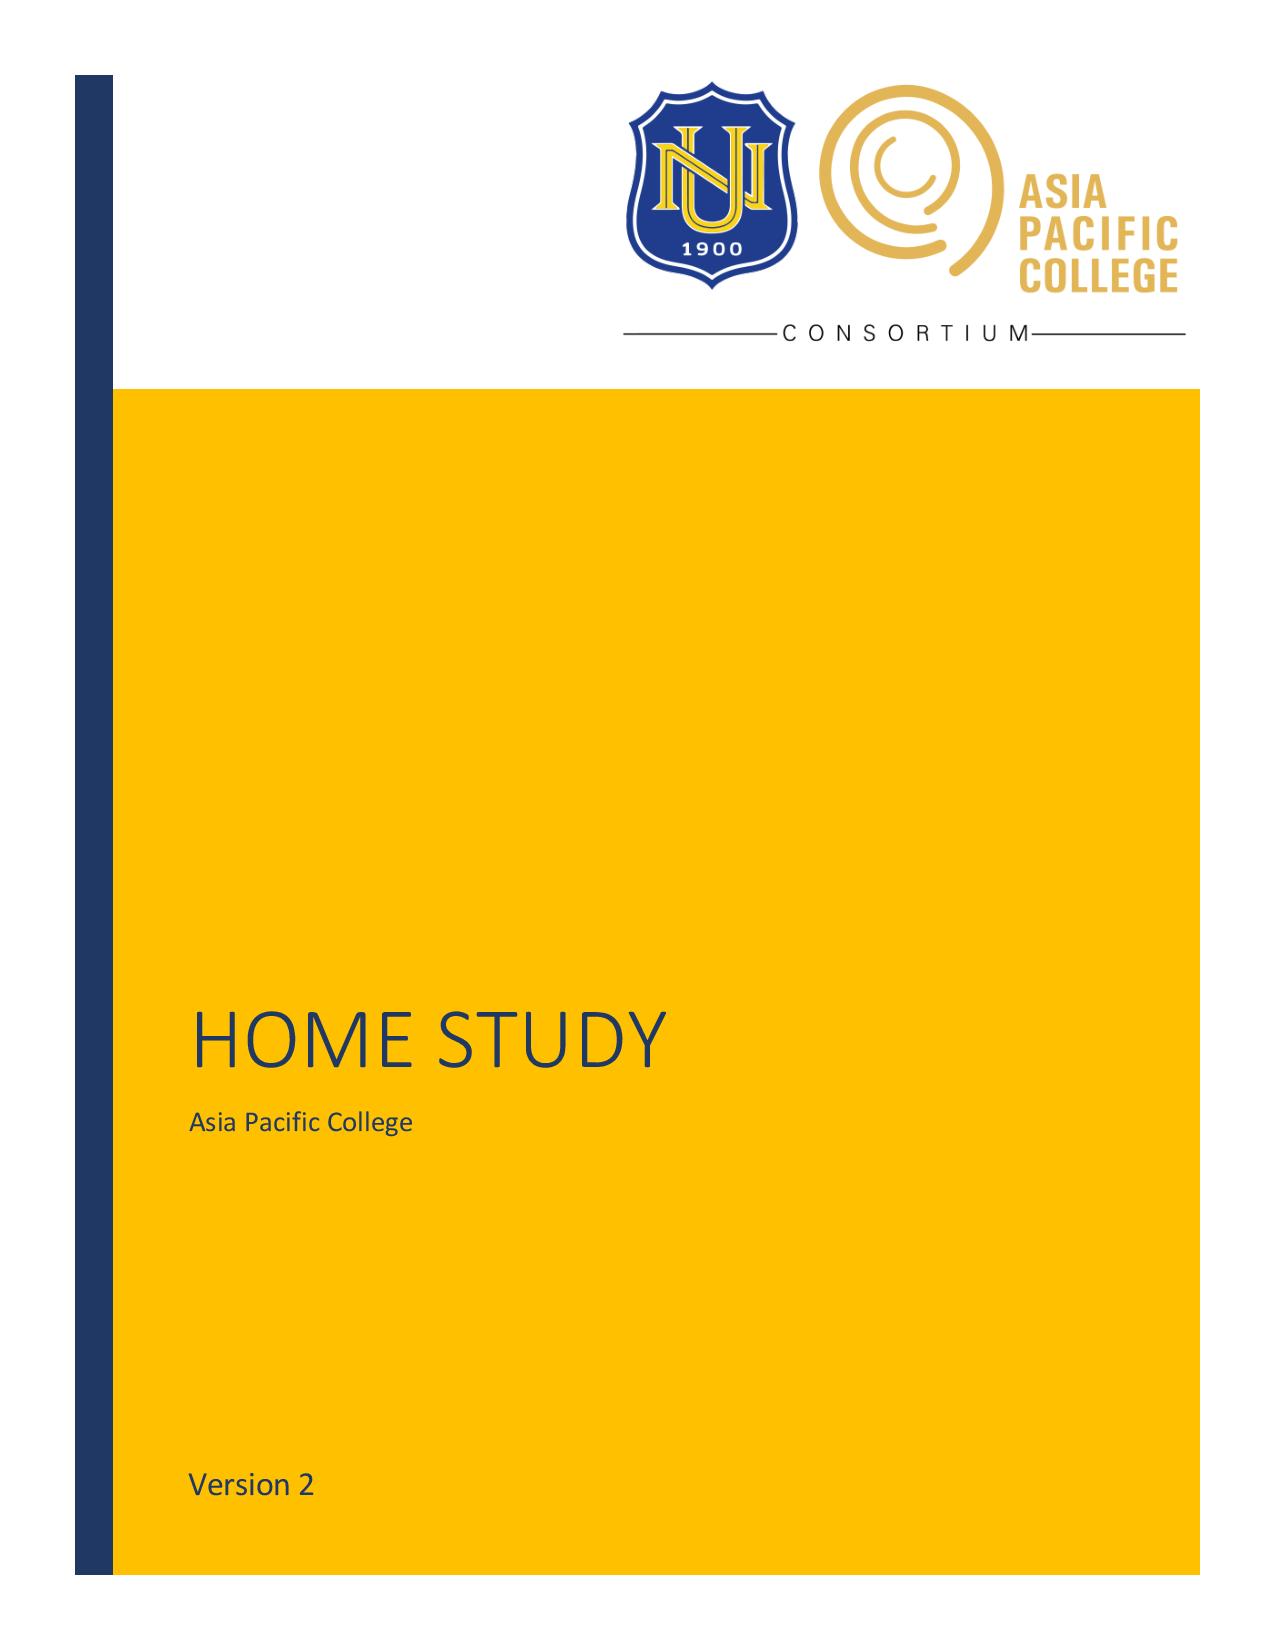 1. Home Study F_1 May 2020 v2-page-001